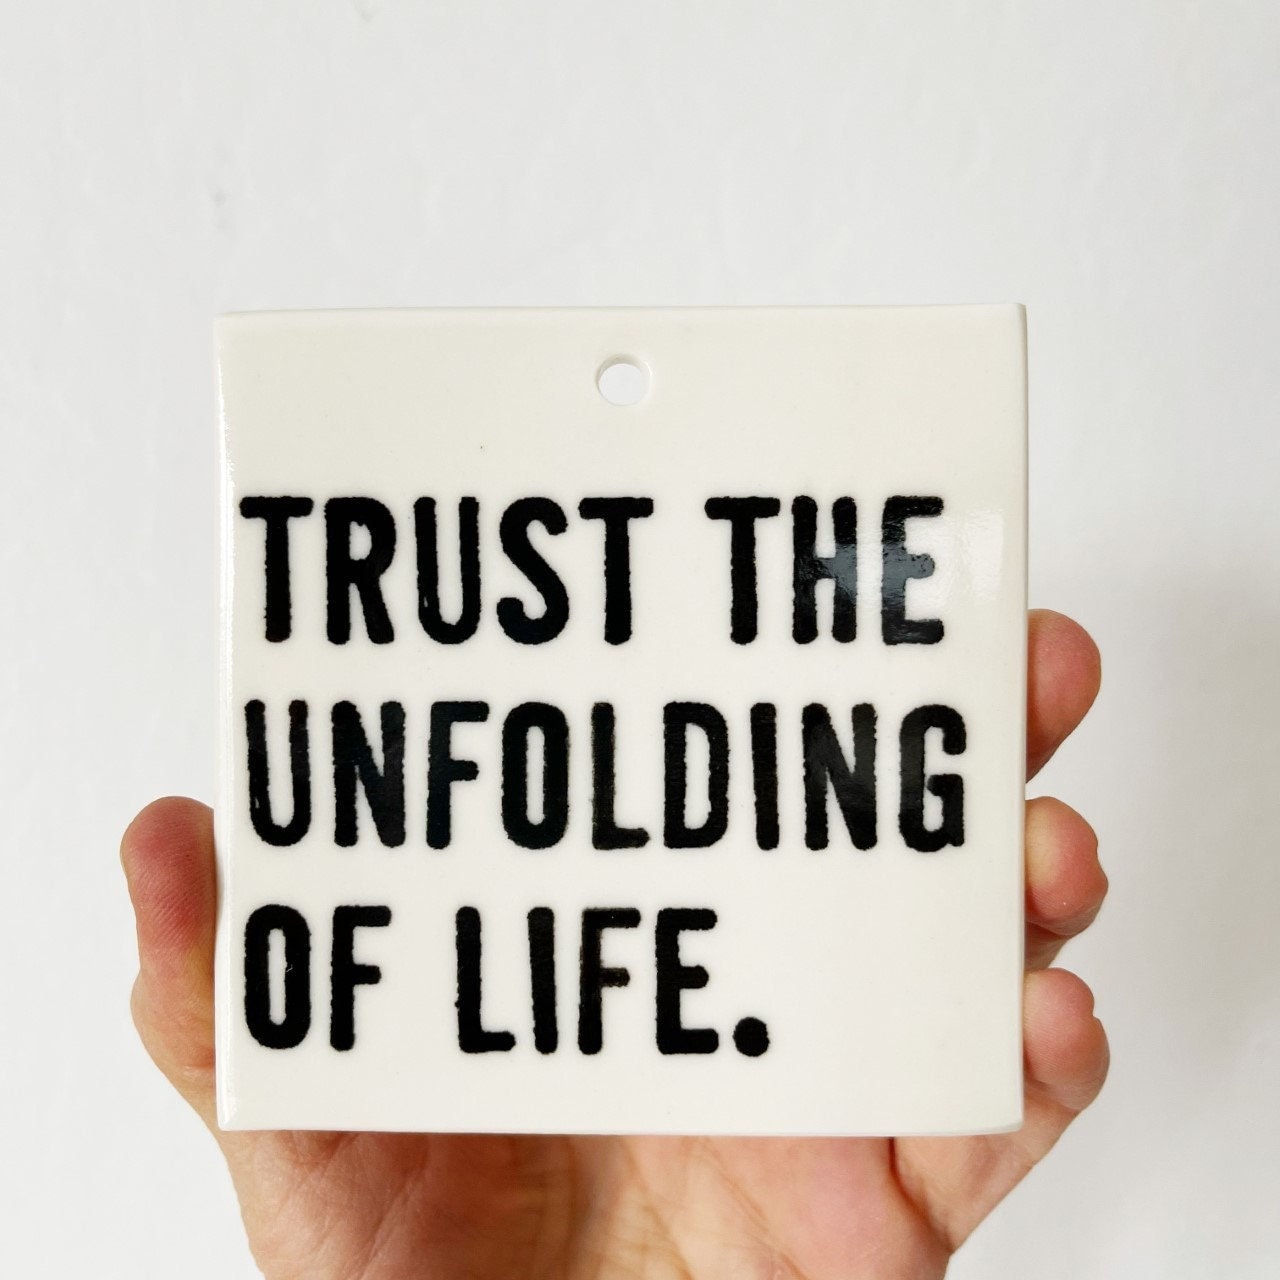 trust | trust ceramic wall tile | ceramic wall art | daily inspiration | trust life | go with the flow | meditation | accept | surrender